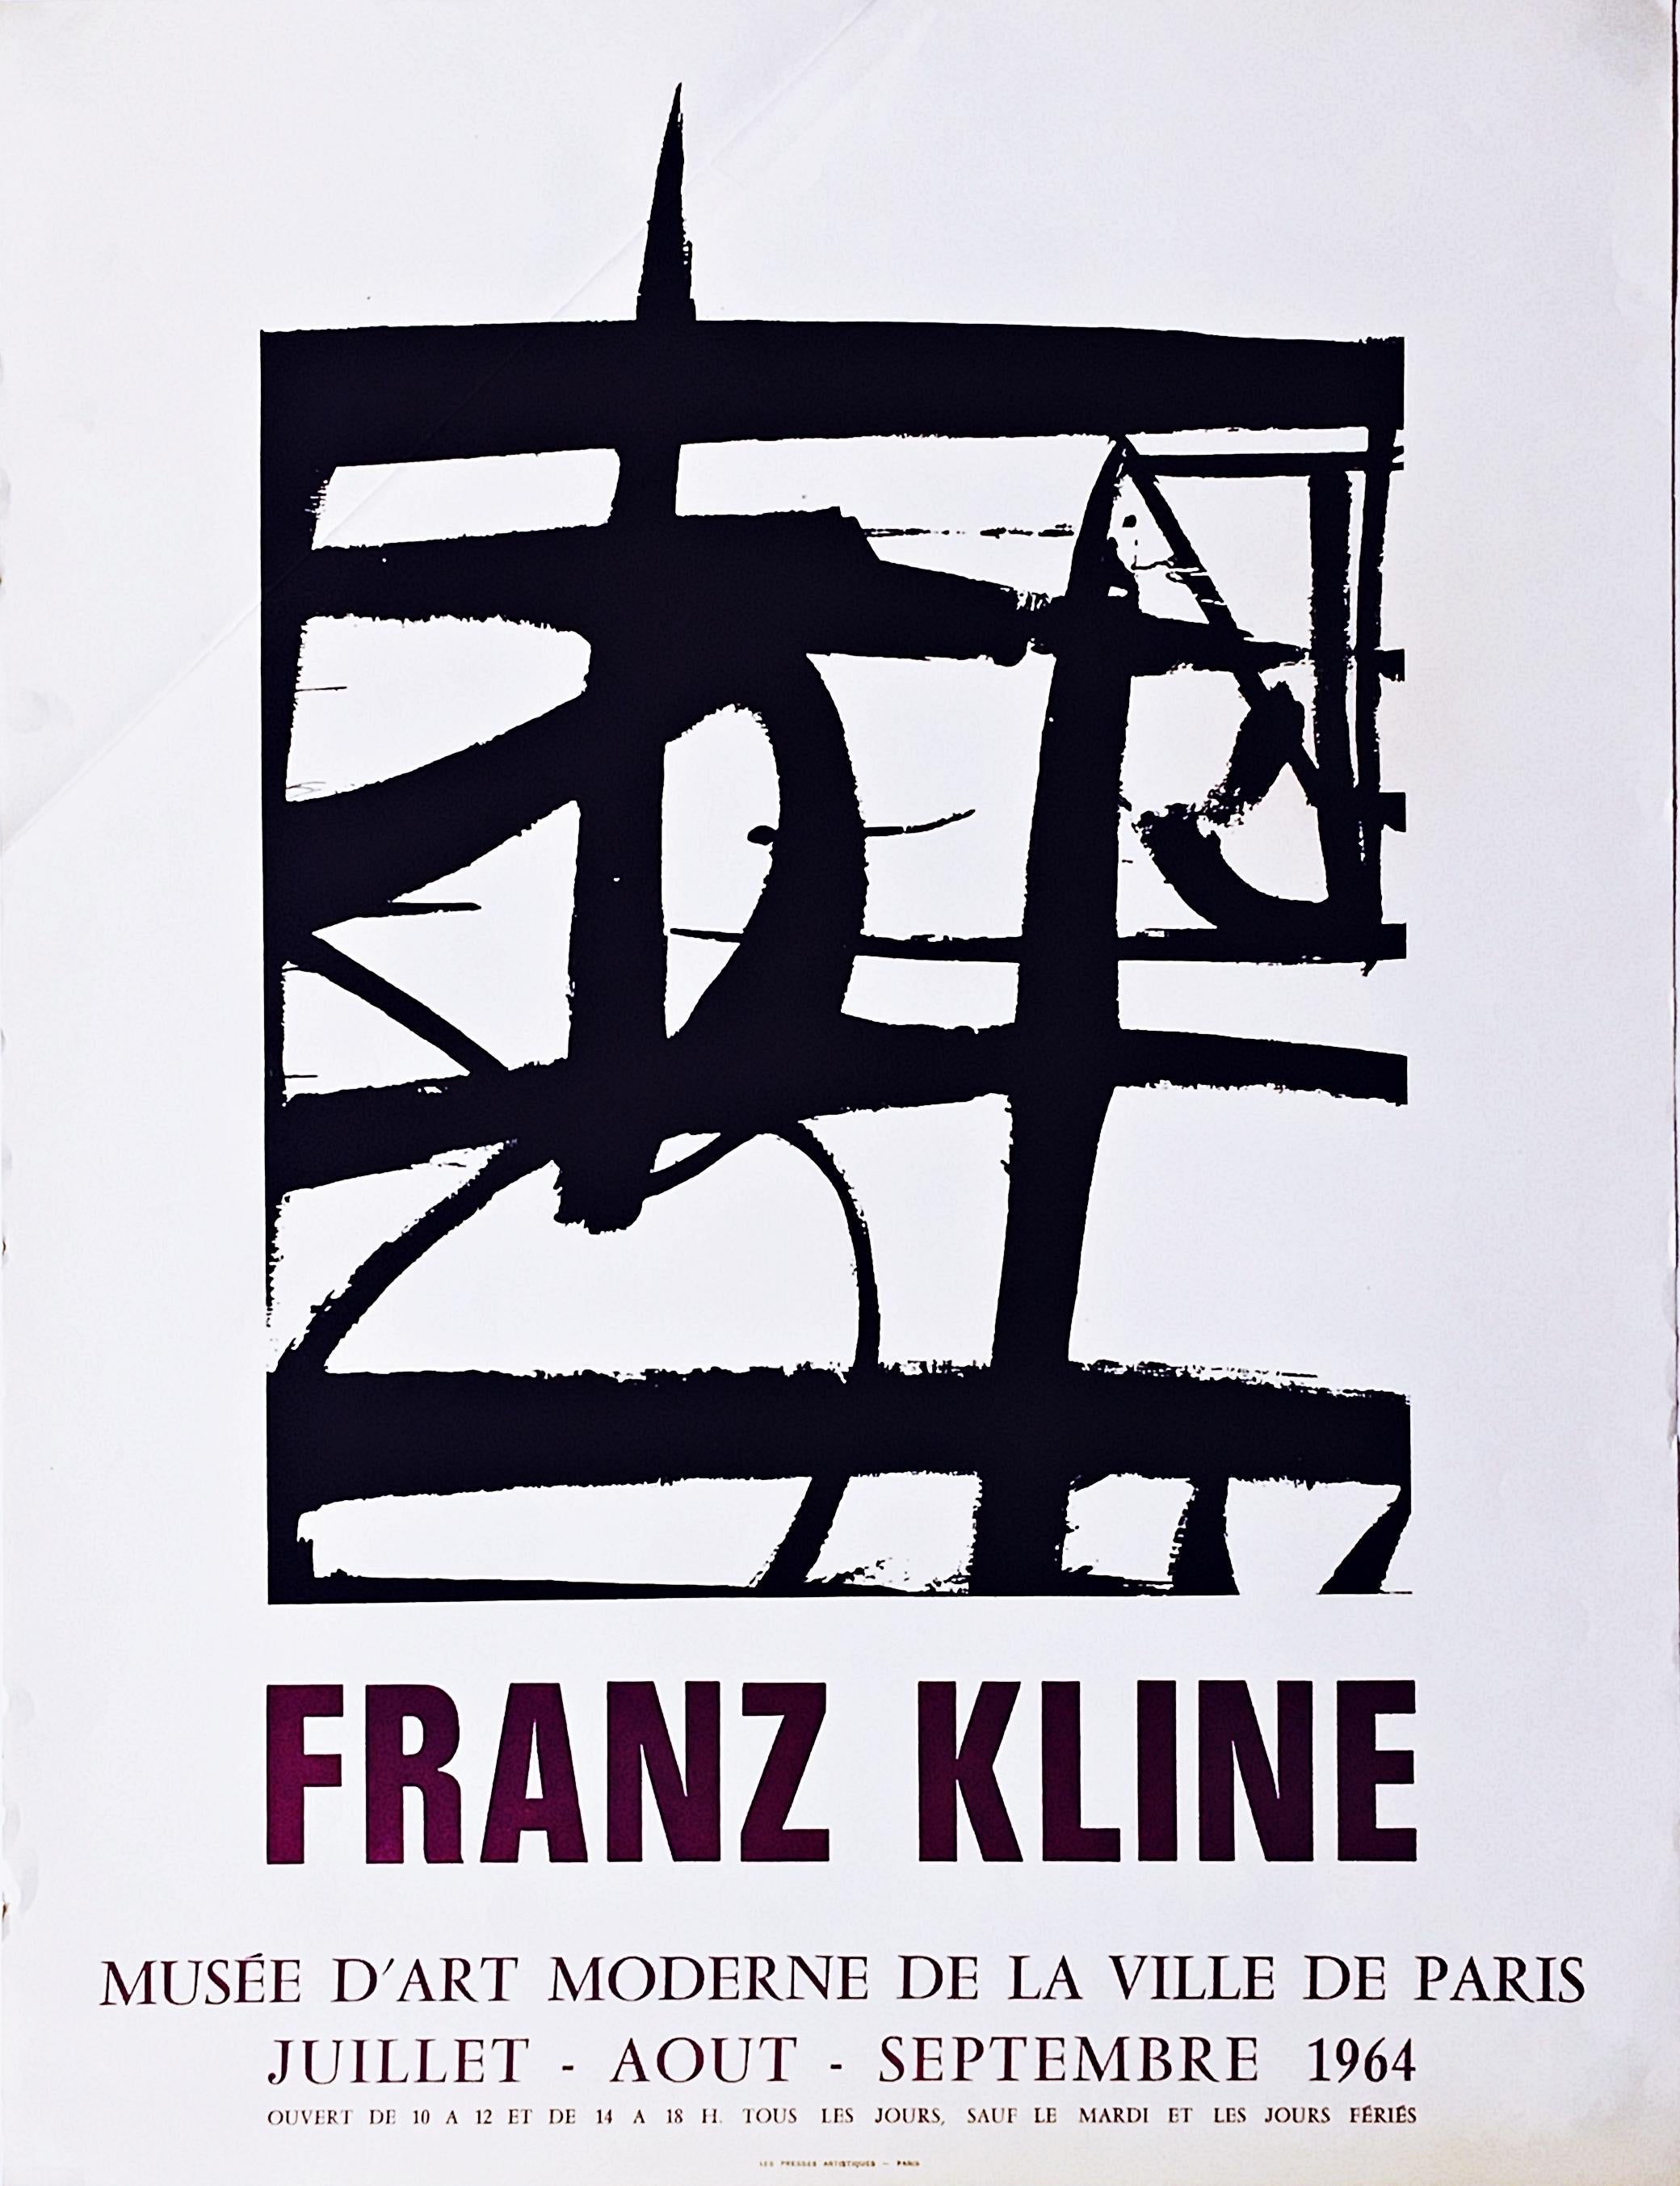 Franz Kline
Franz Kline Juillet-Août-Septembre 1964, original vintage poster, 1964
Extremely scarce European offset lithograph exhibition poster
Limited Edition of 500 (unnumbered)
25 1/2 × 19 2/5 inches
 Highly collectible and scarce